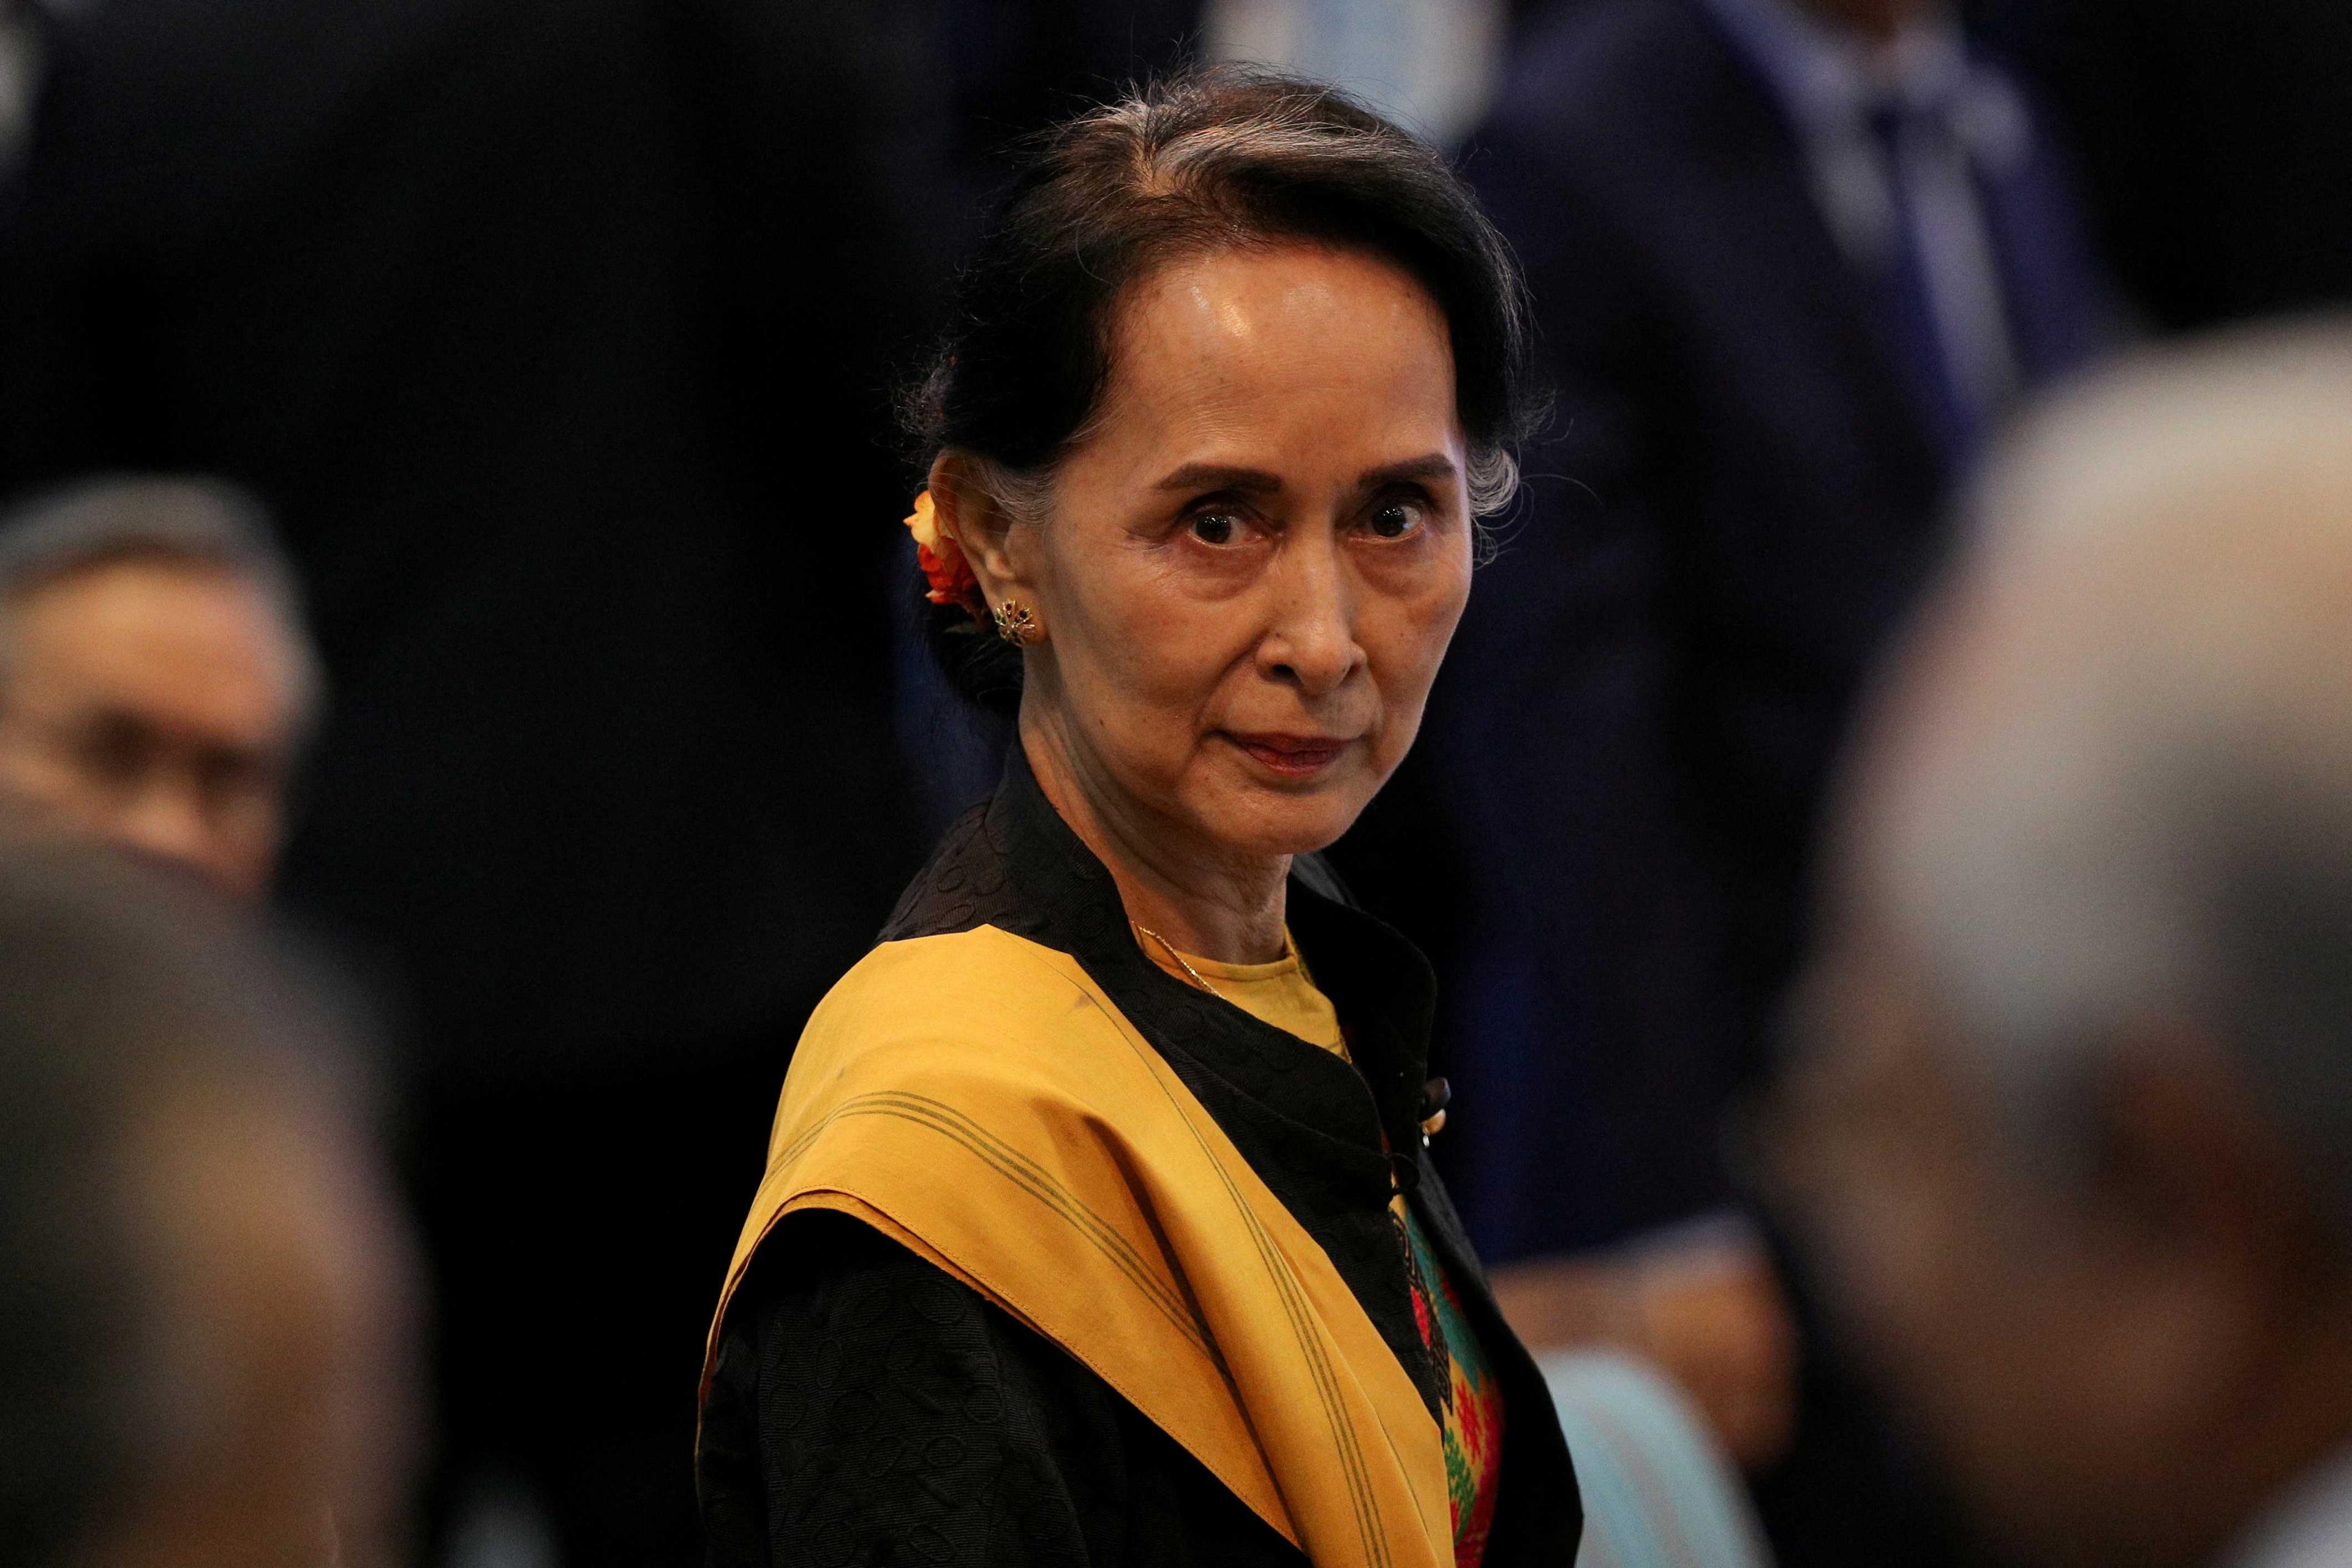 Myanmar State Counselor Aung San Suu Kyi attends the opening session of the 31st Asean Summit in Manila, Philippines, Nov 13, 2017. Photo: Reuters